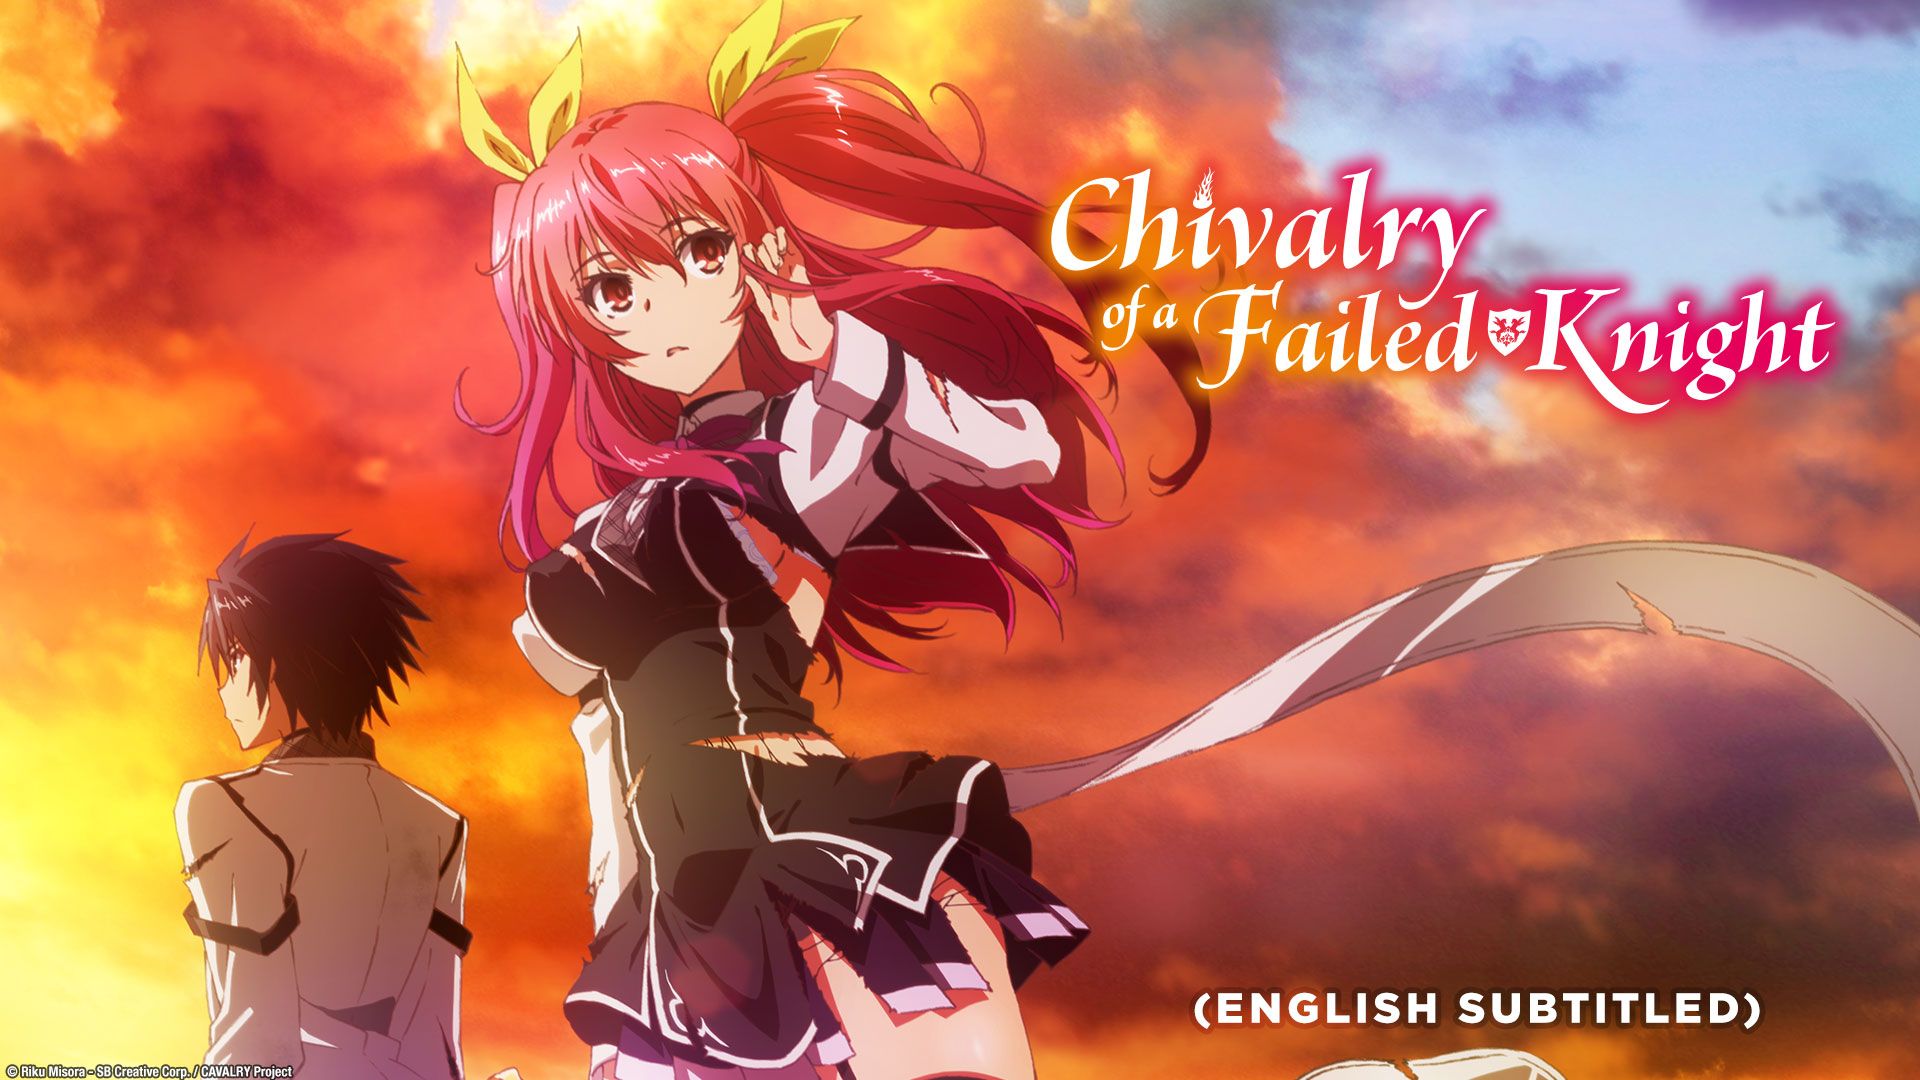 Chivalry of a Failed Knight English Subtitled